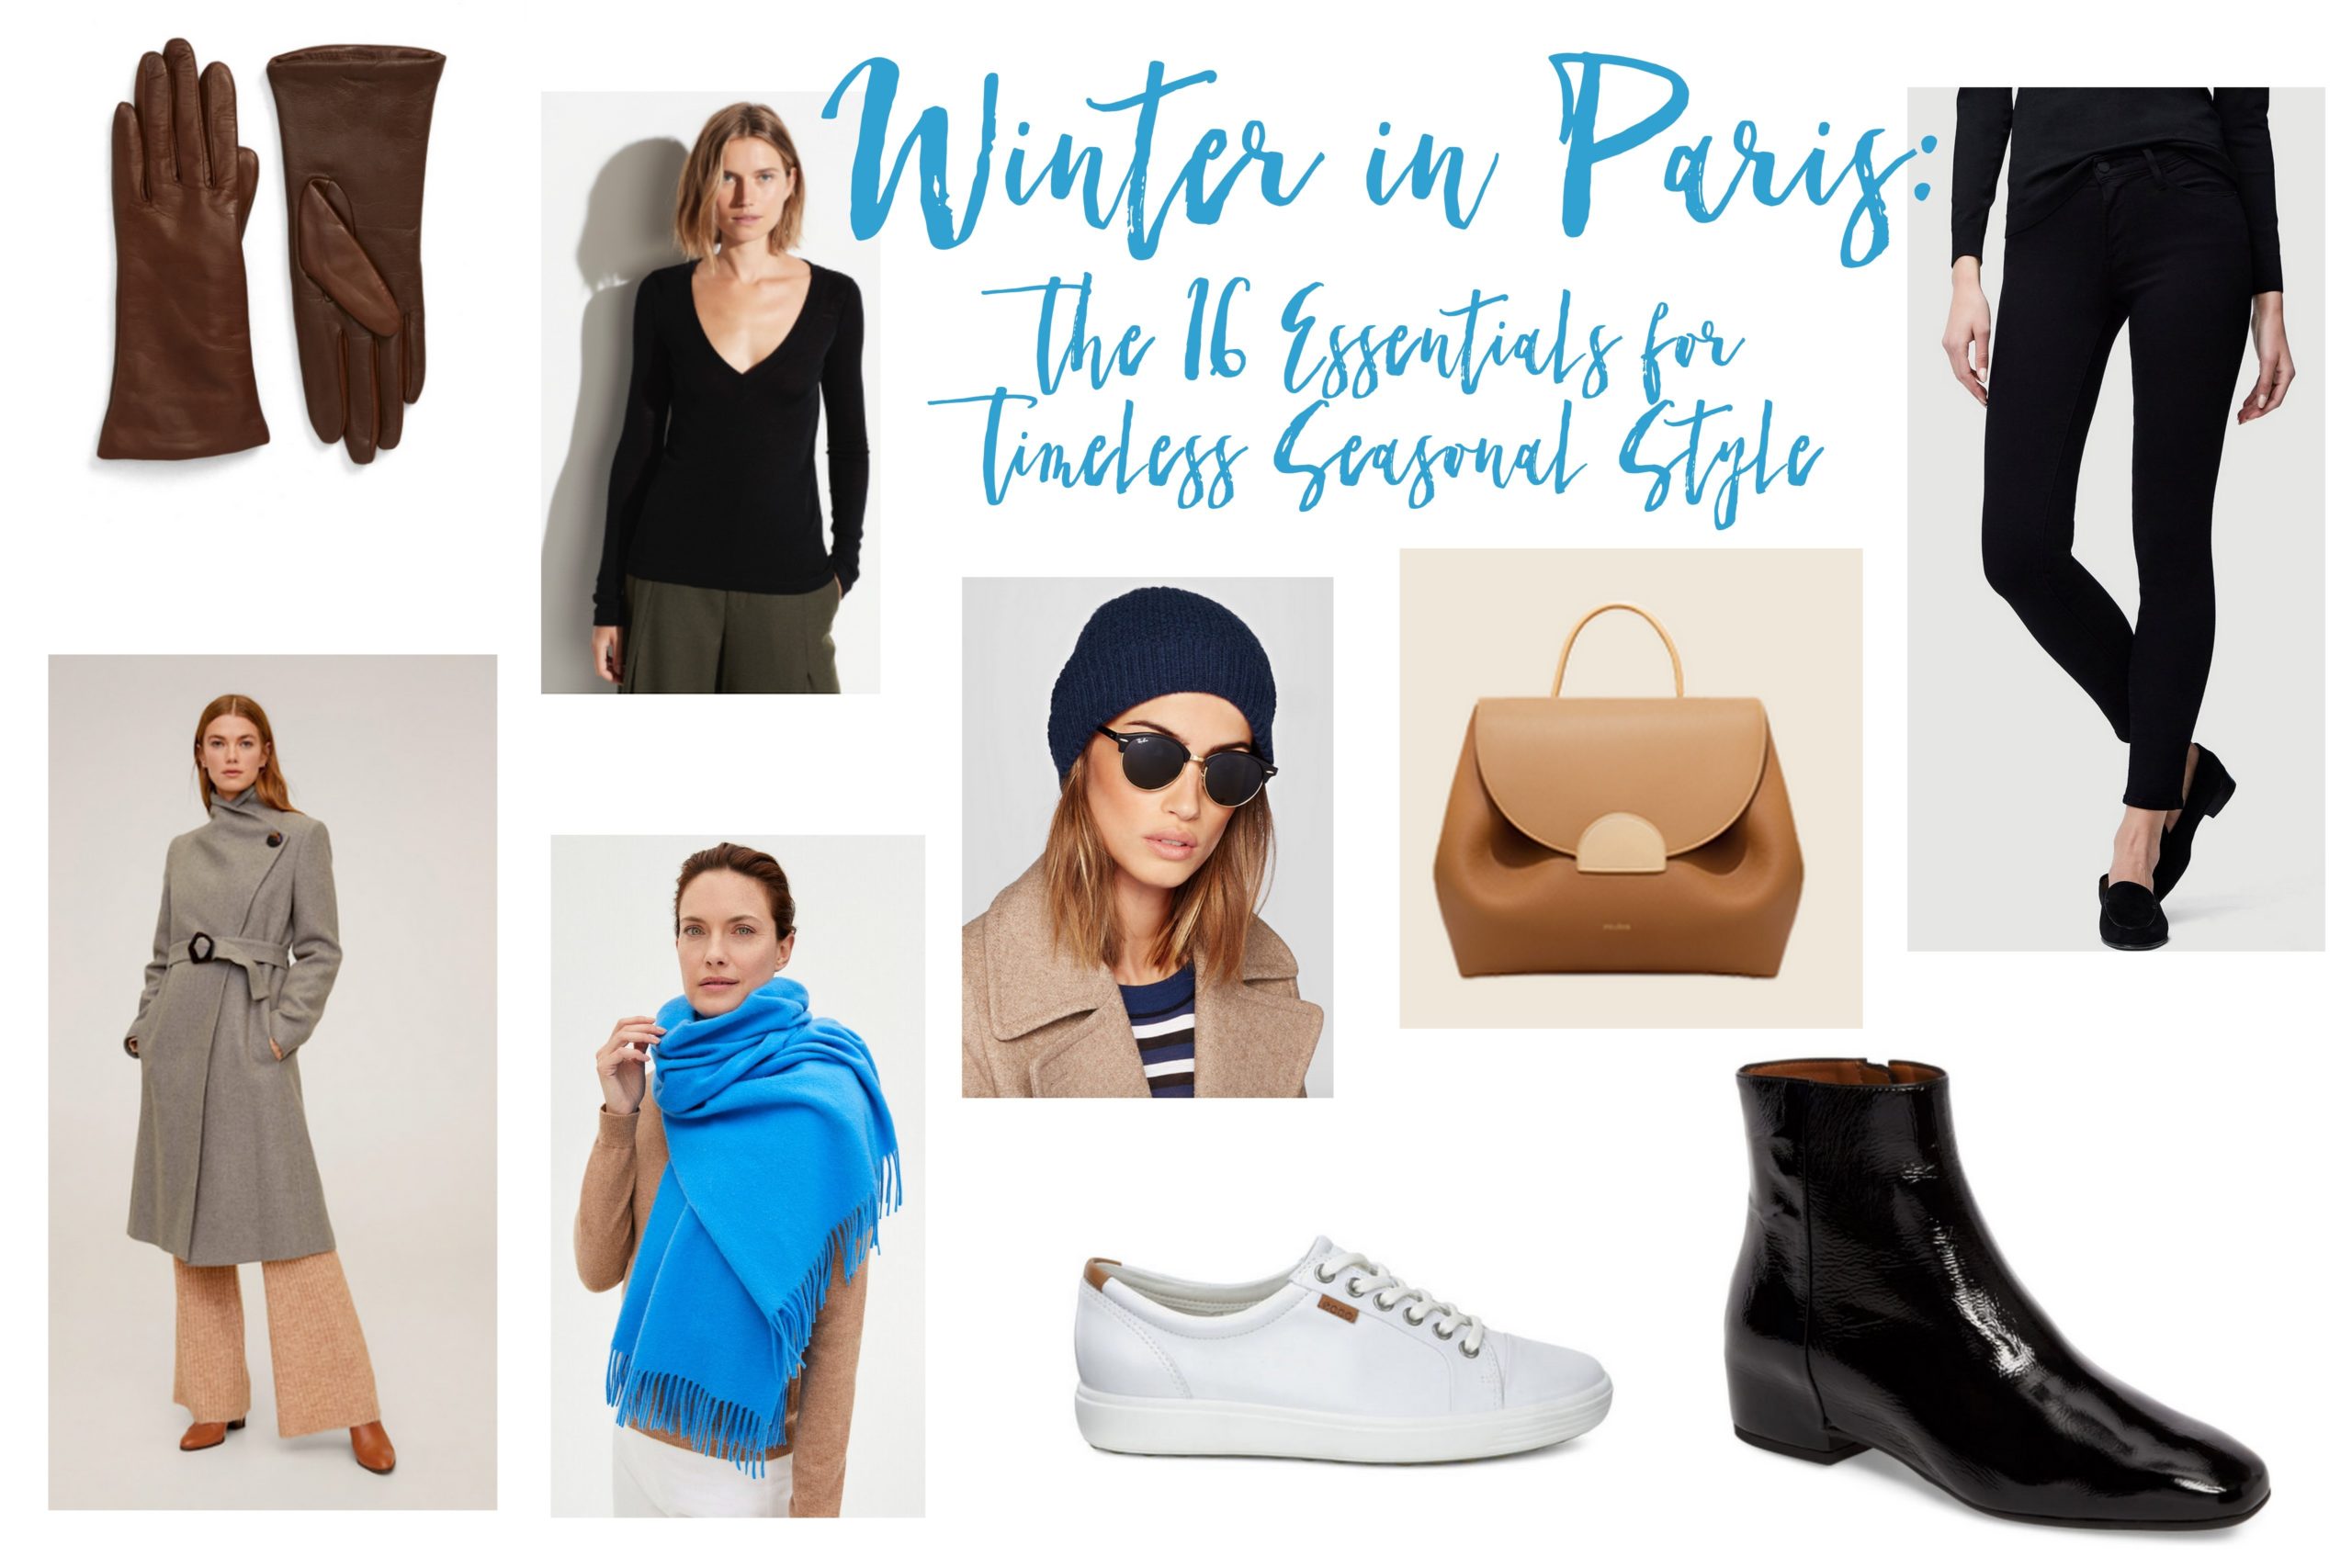 277: Winter in Paris — The 15 Essentials for Timeless Seasonal Style